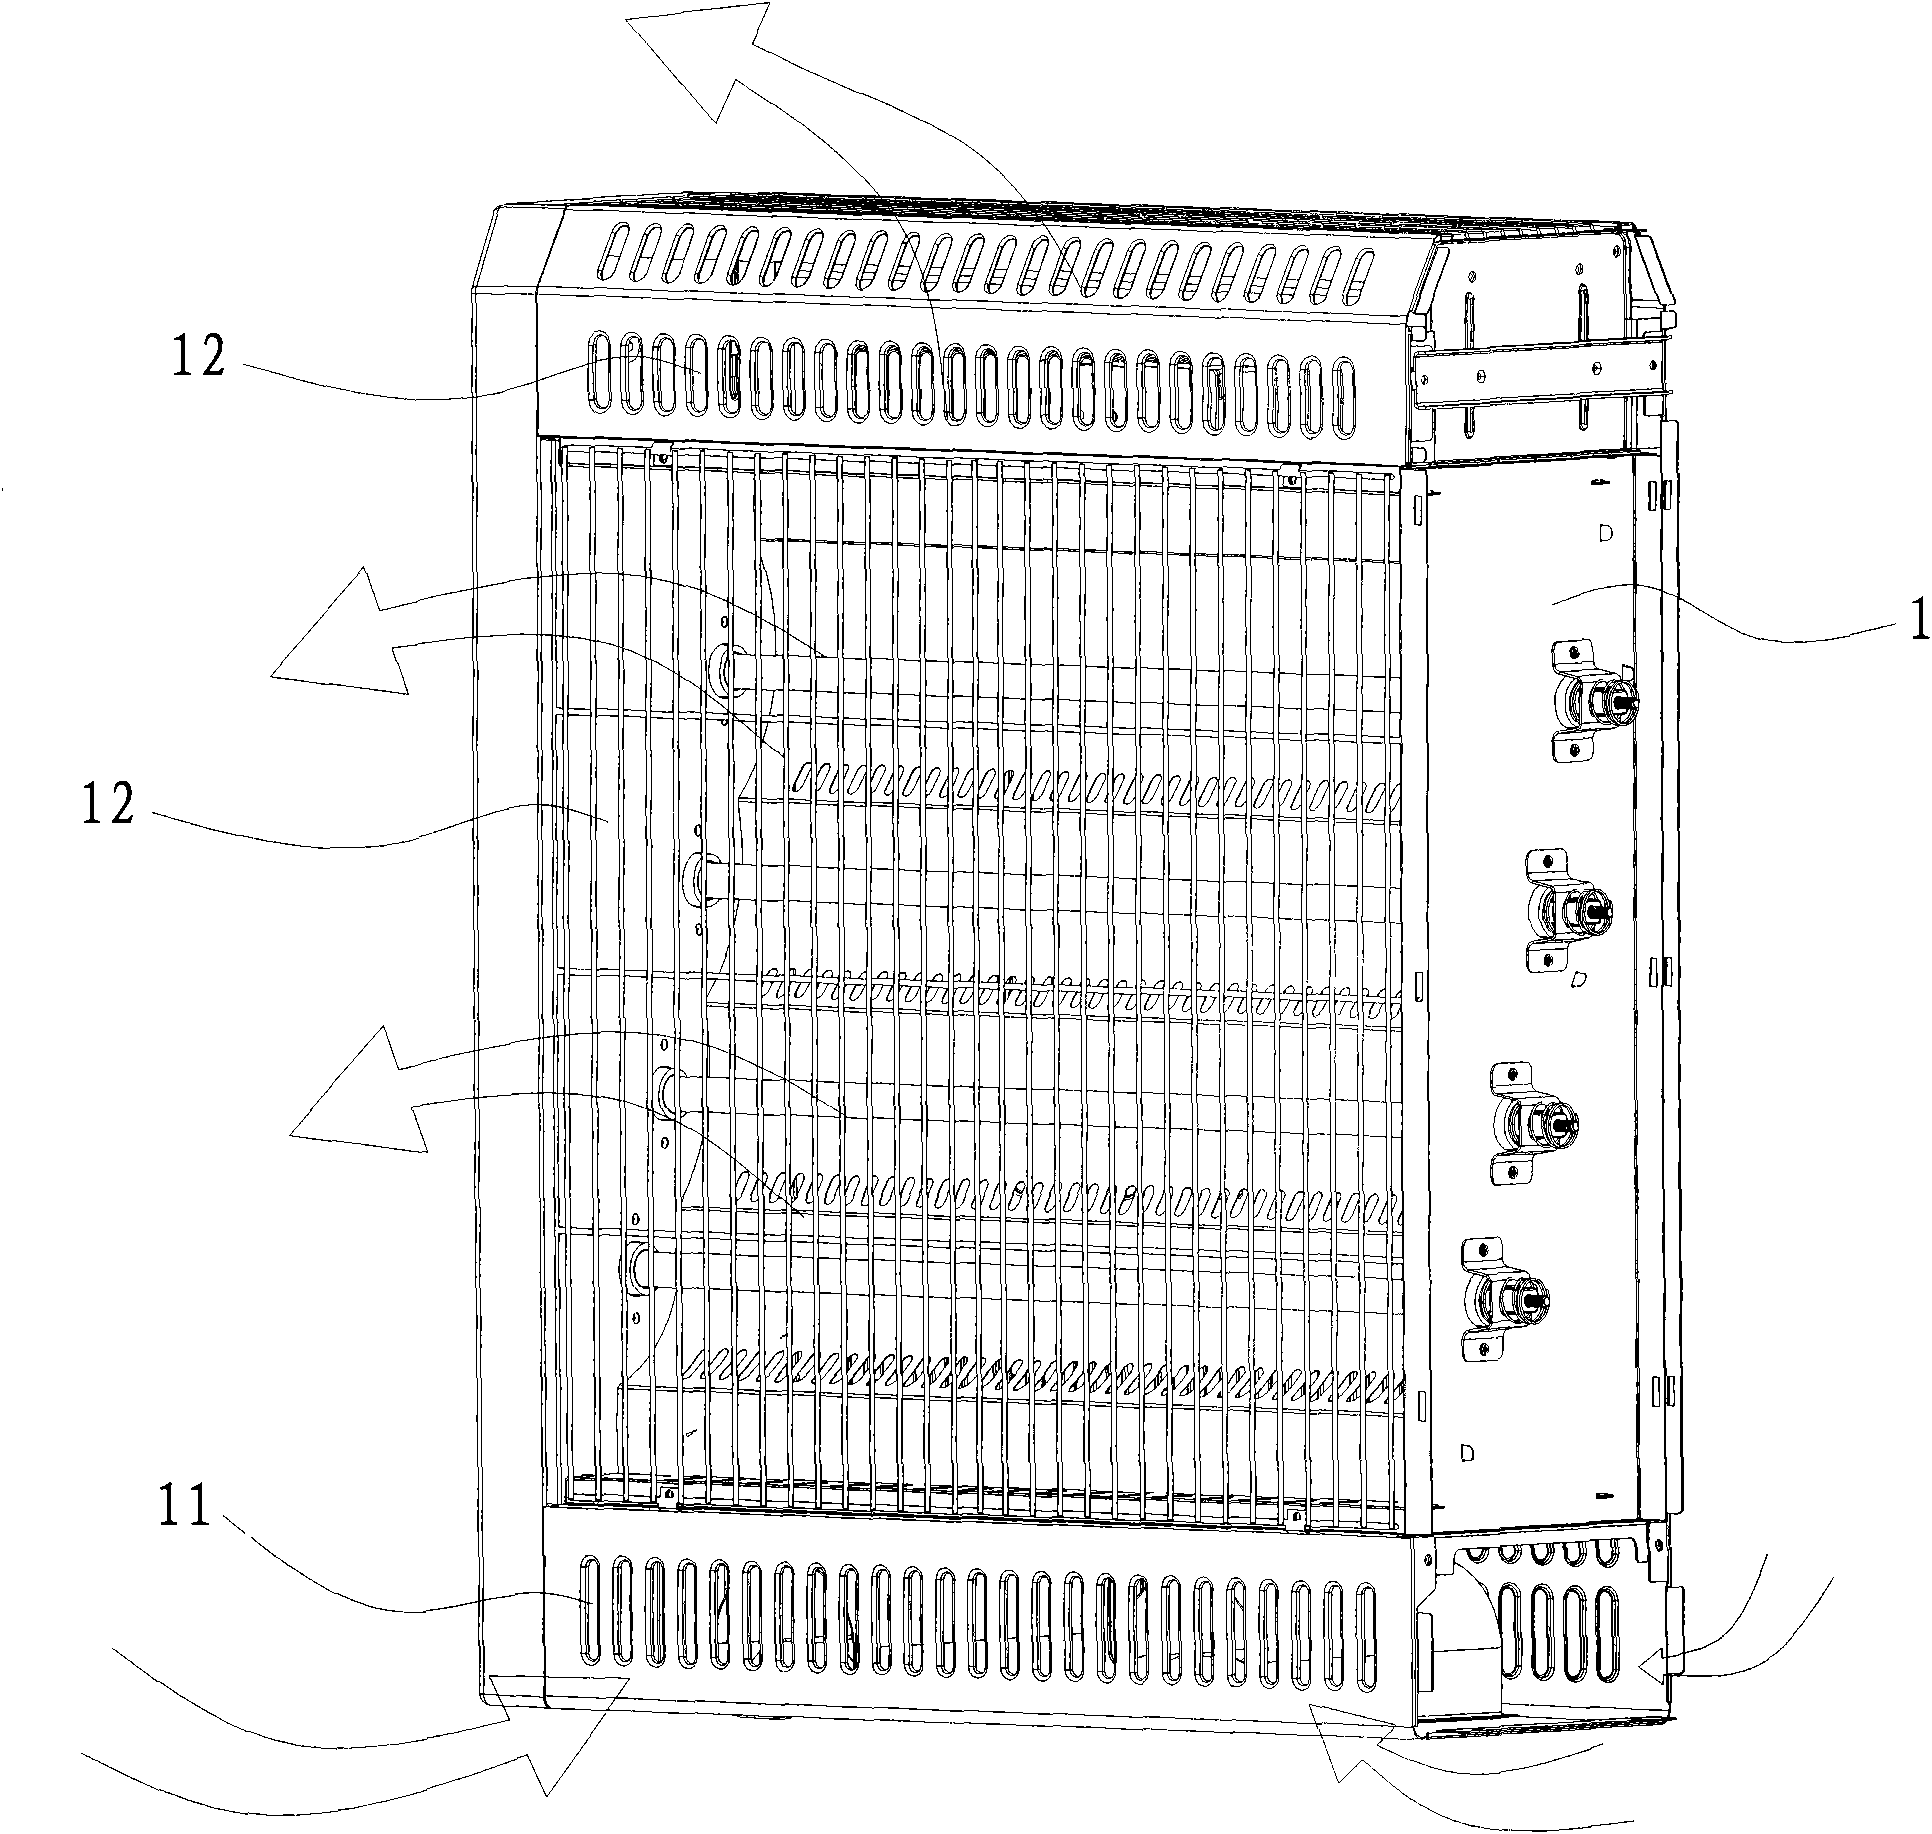 Circulating and reflecting electric heater